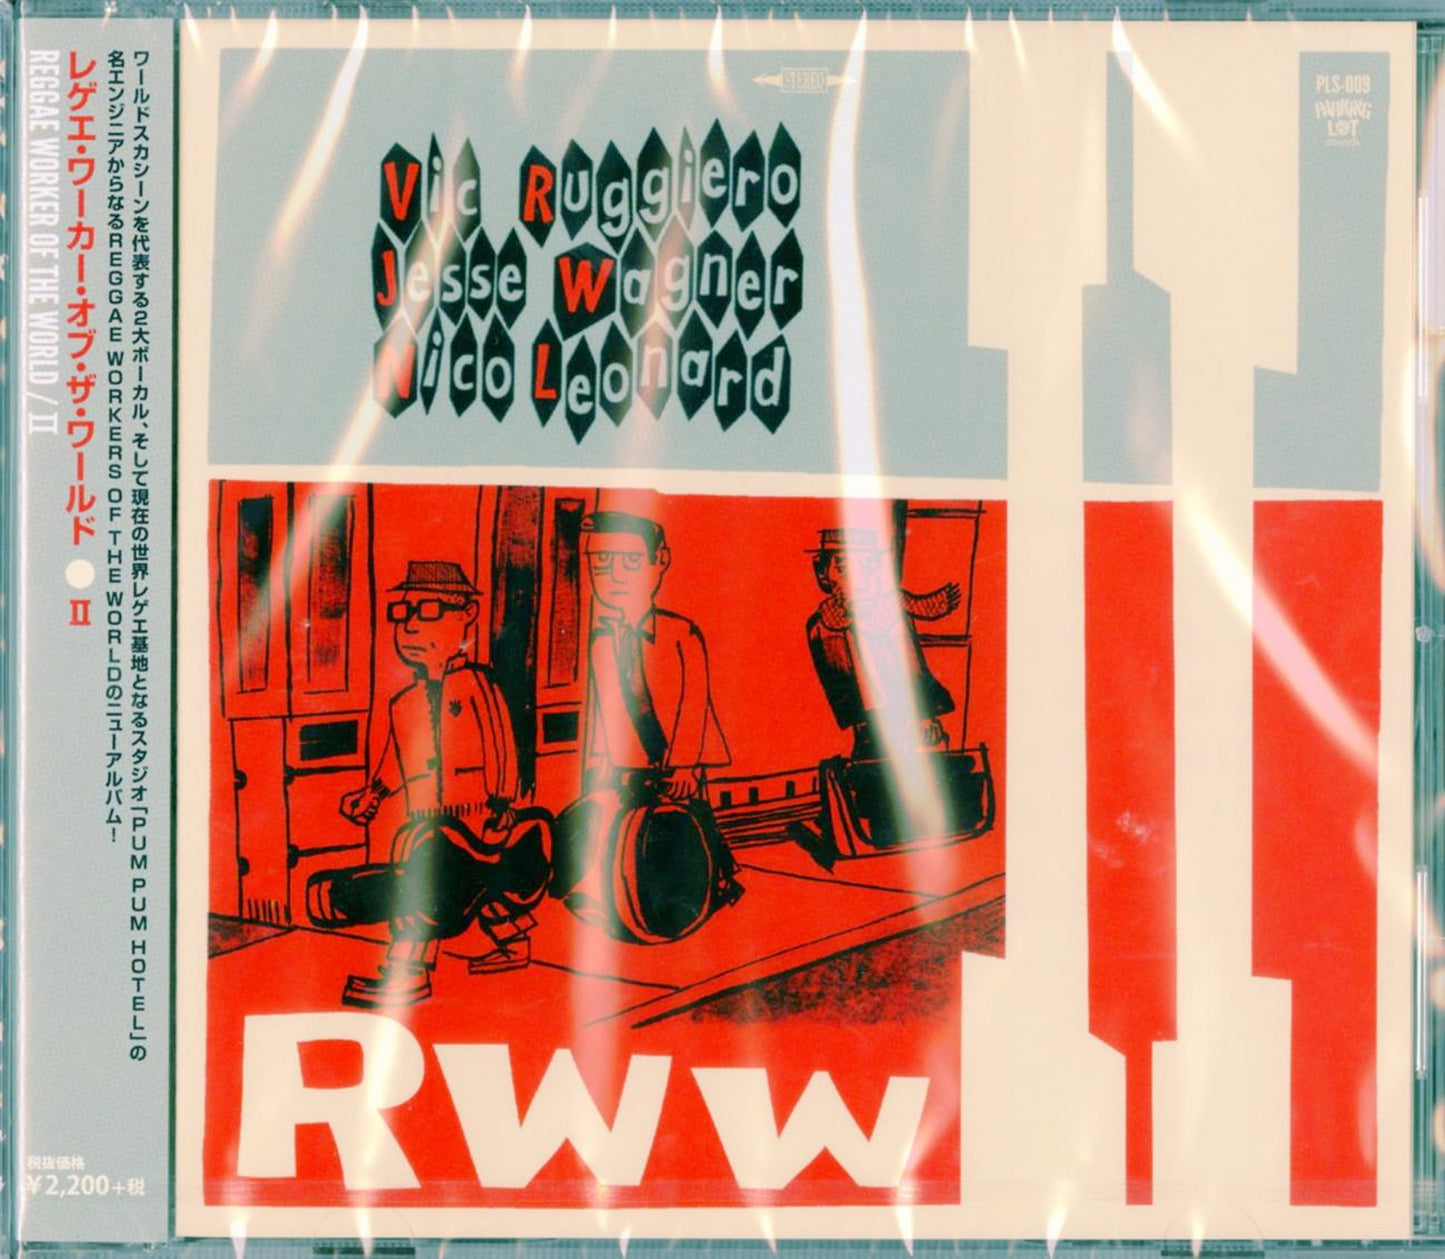 Reggae Workers Of The World - Rww 2 - Japan CD